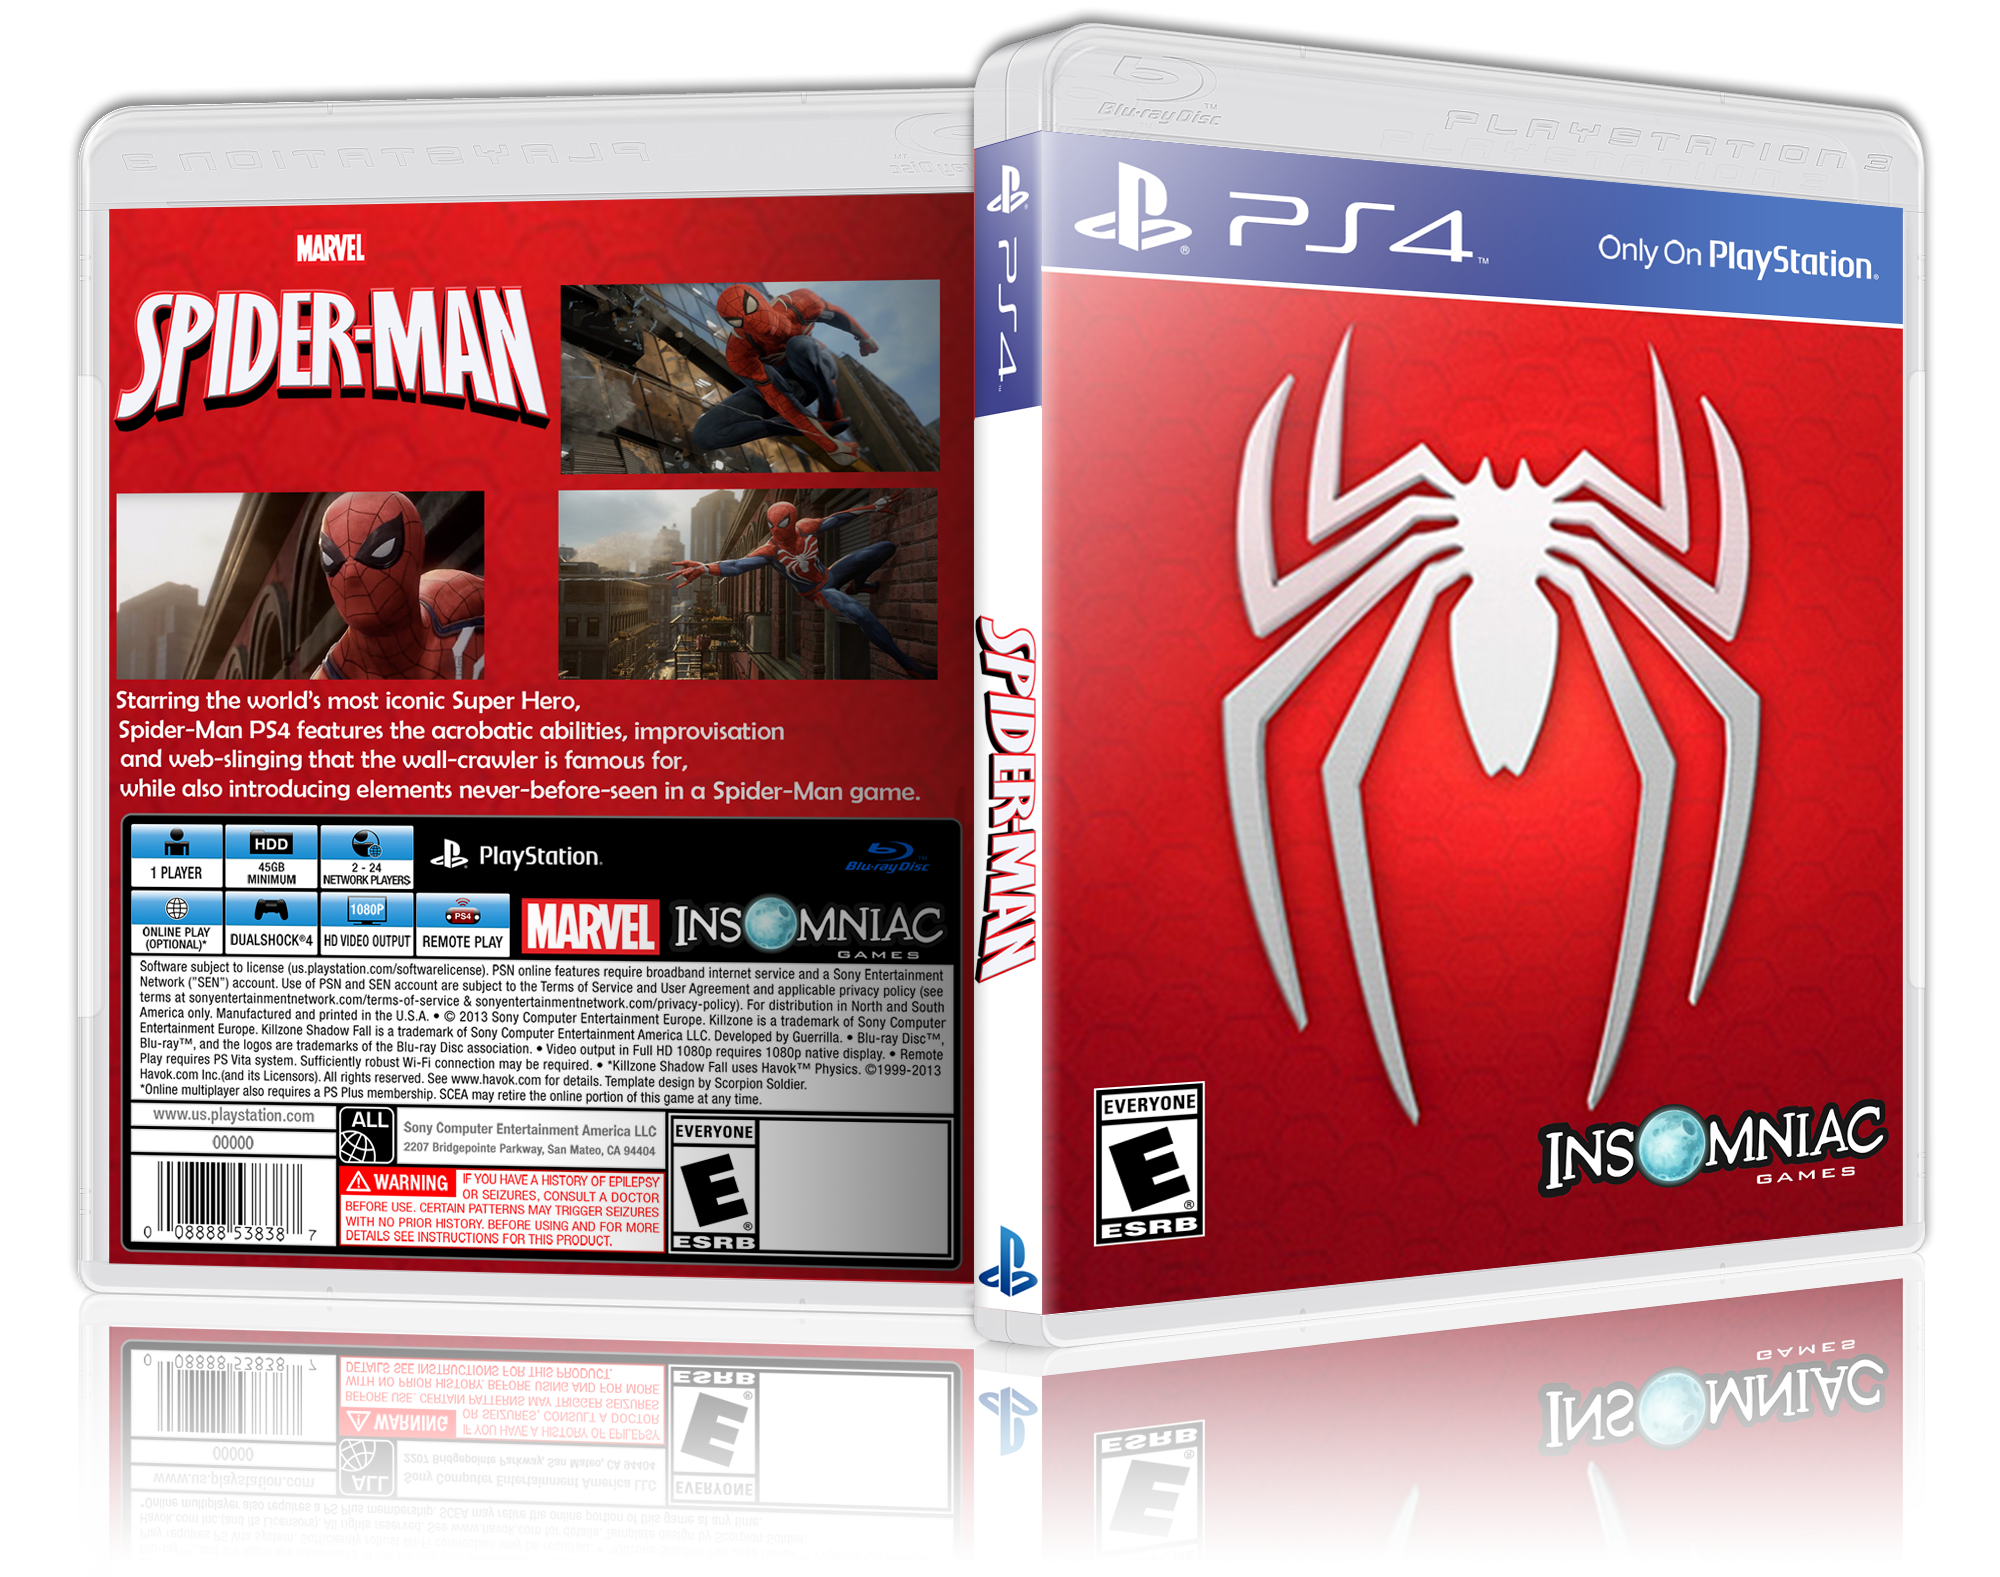 Spider-Man: PS4 box cover